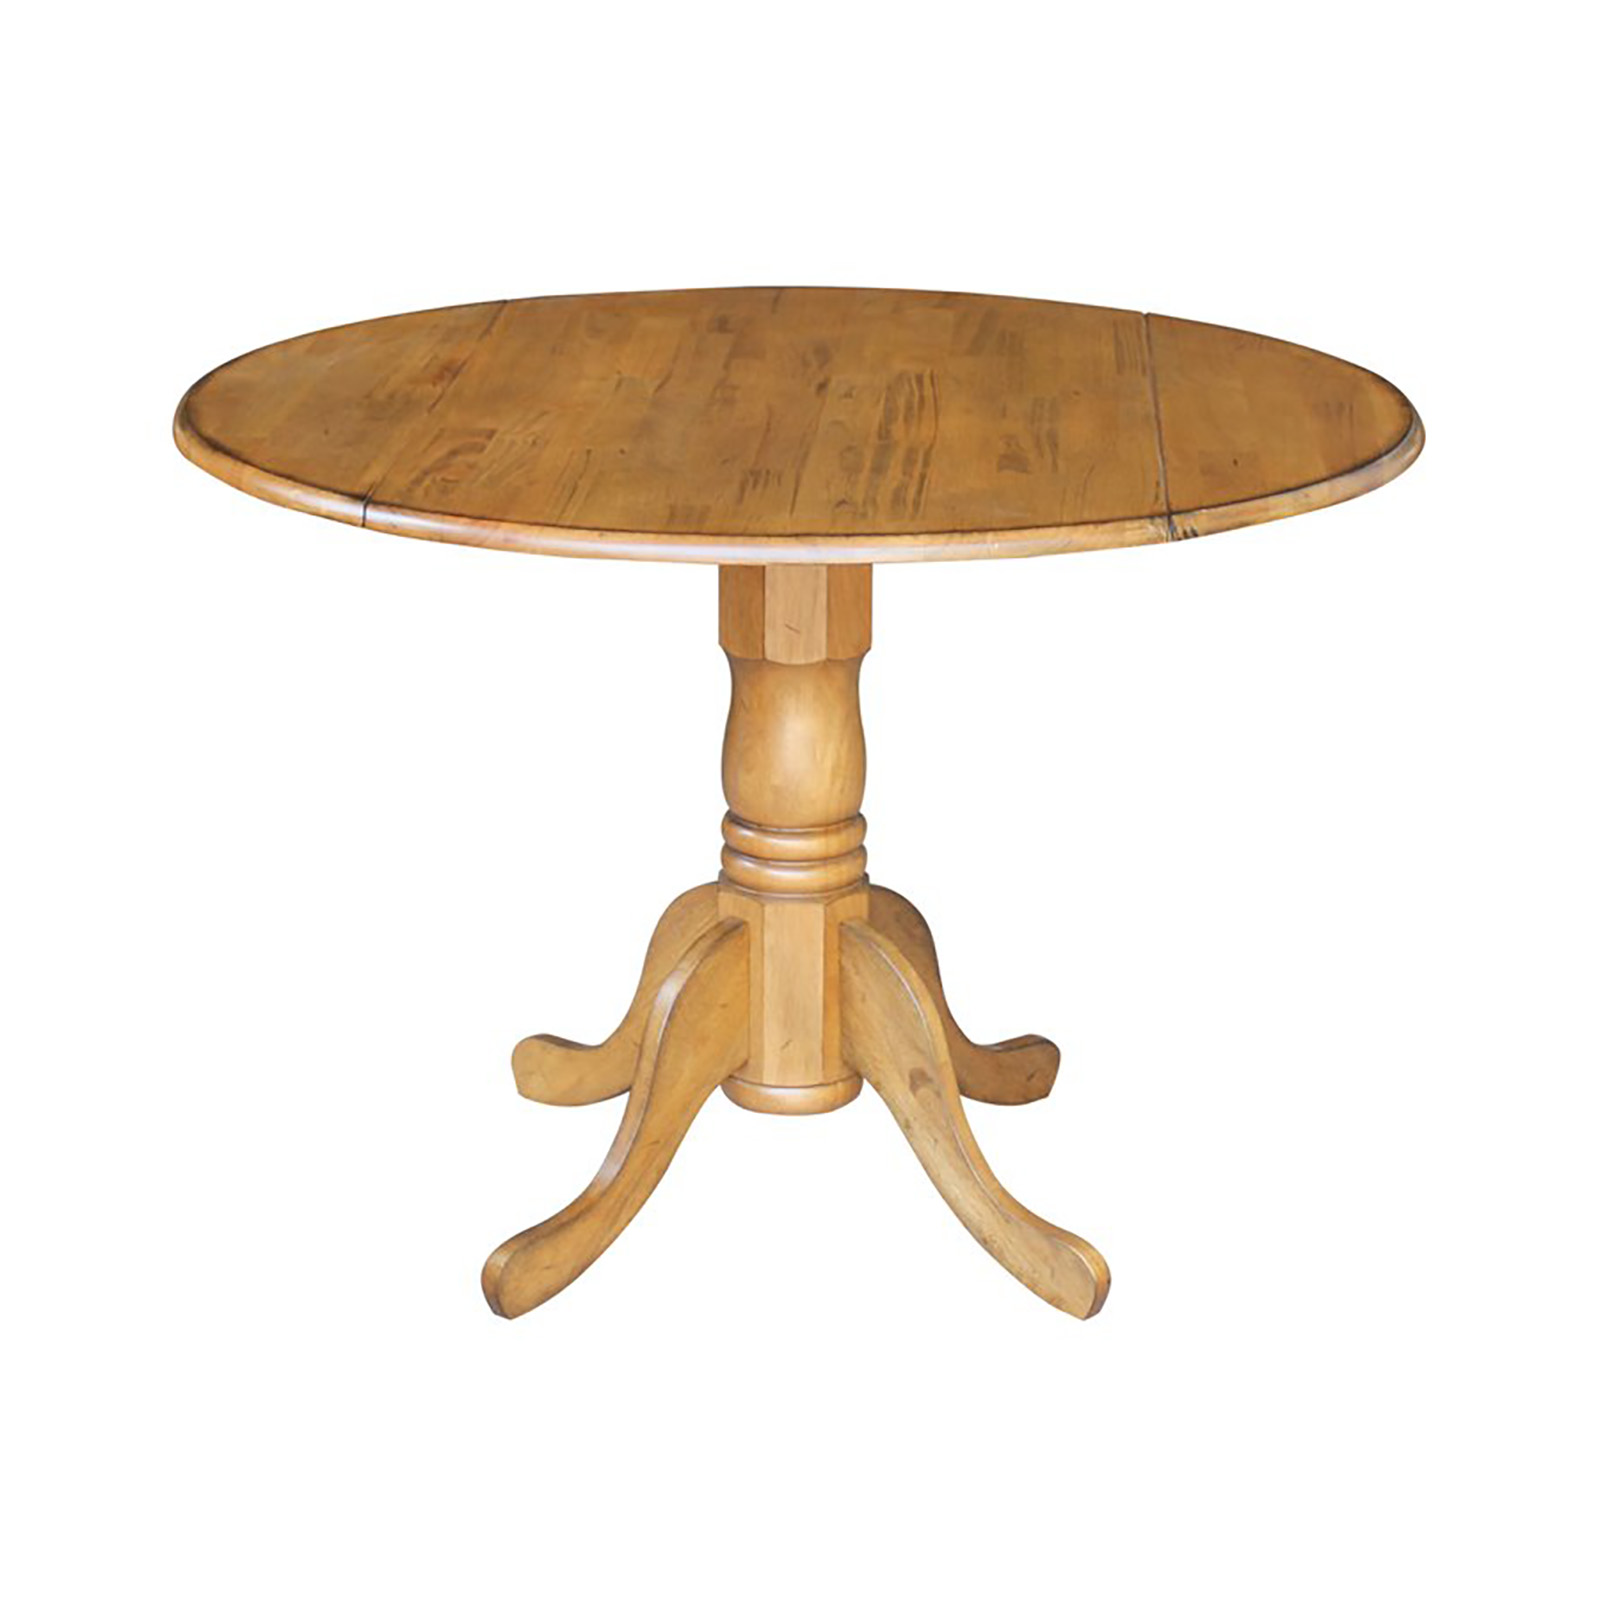 International Concepts Mason 42"Round Dual Drop Leaf Pedestal Dining Table in Pecan